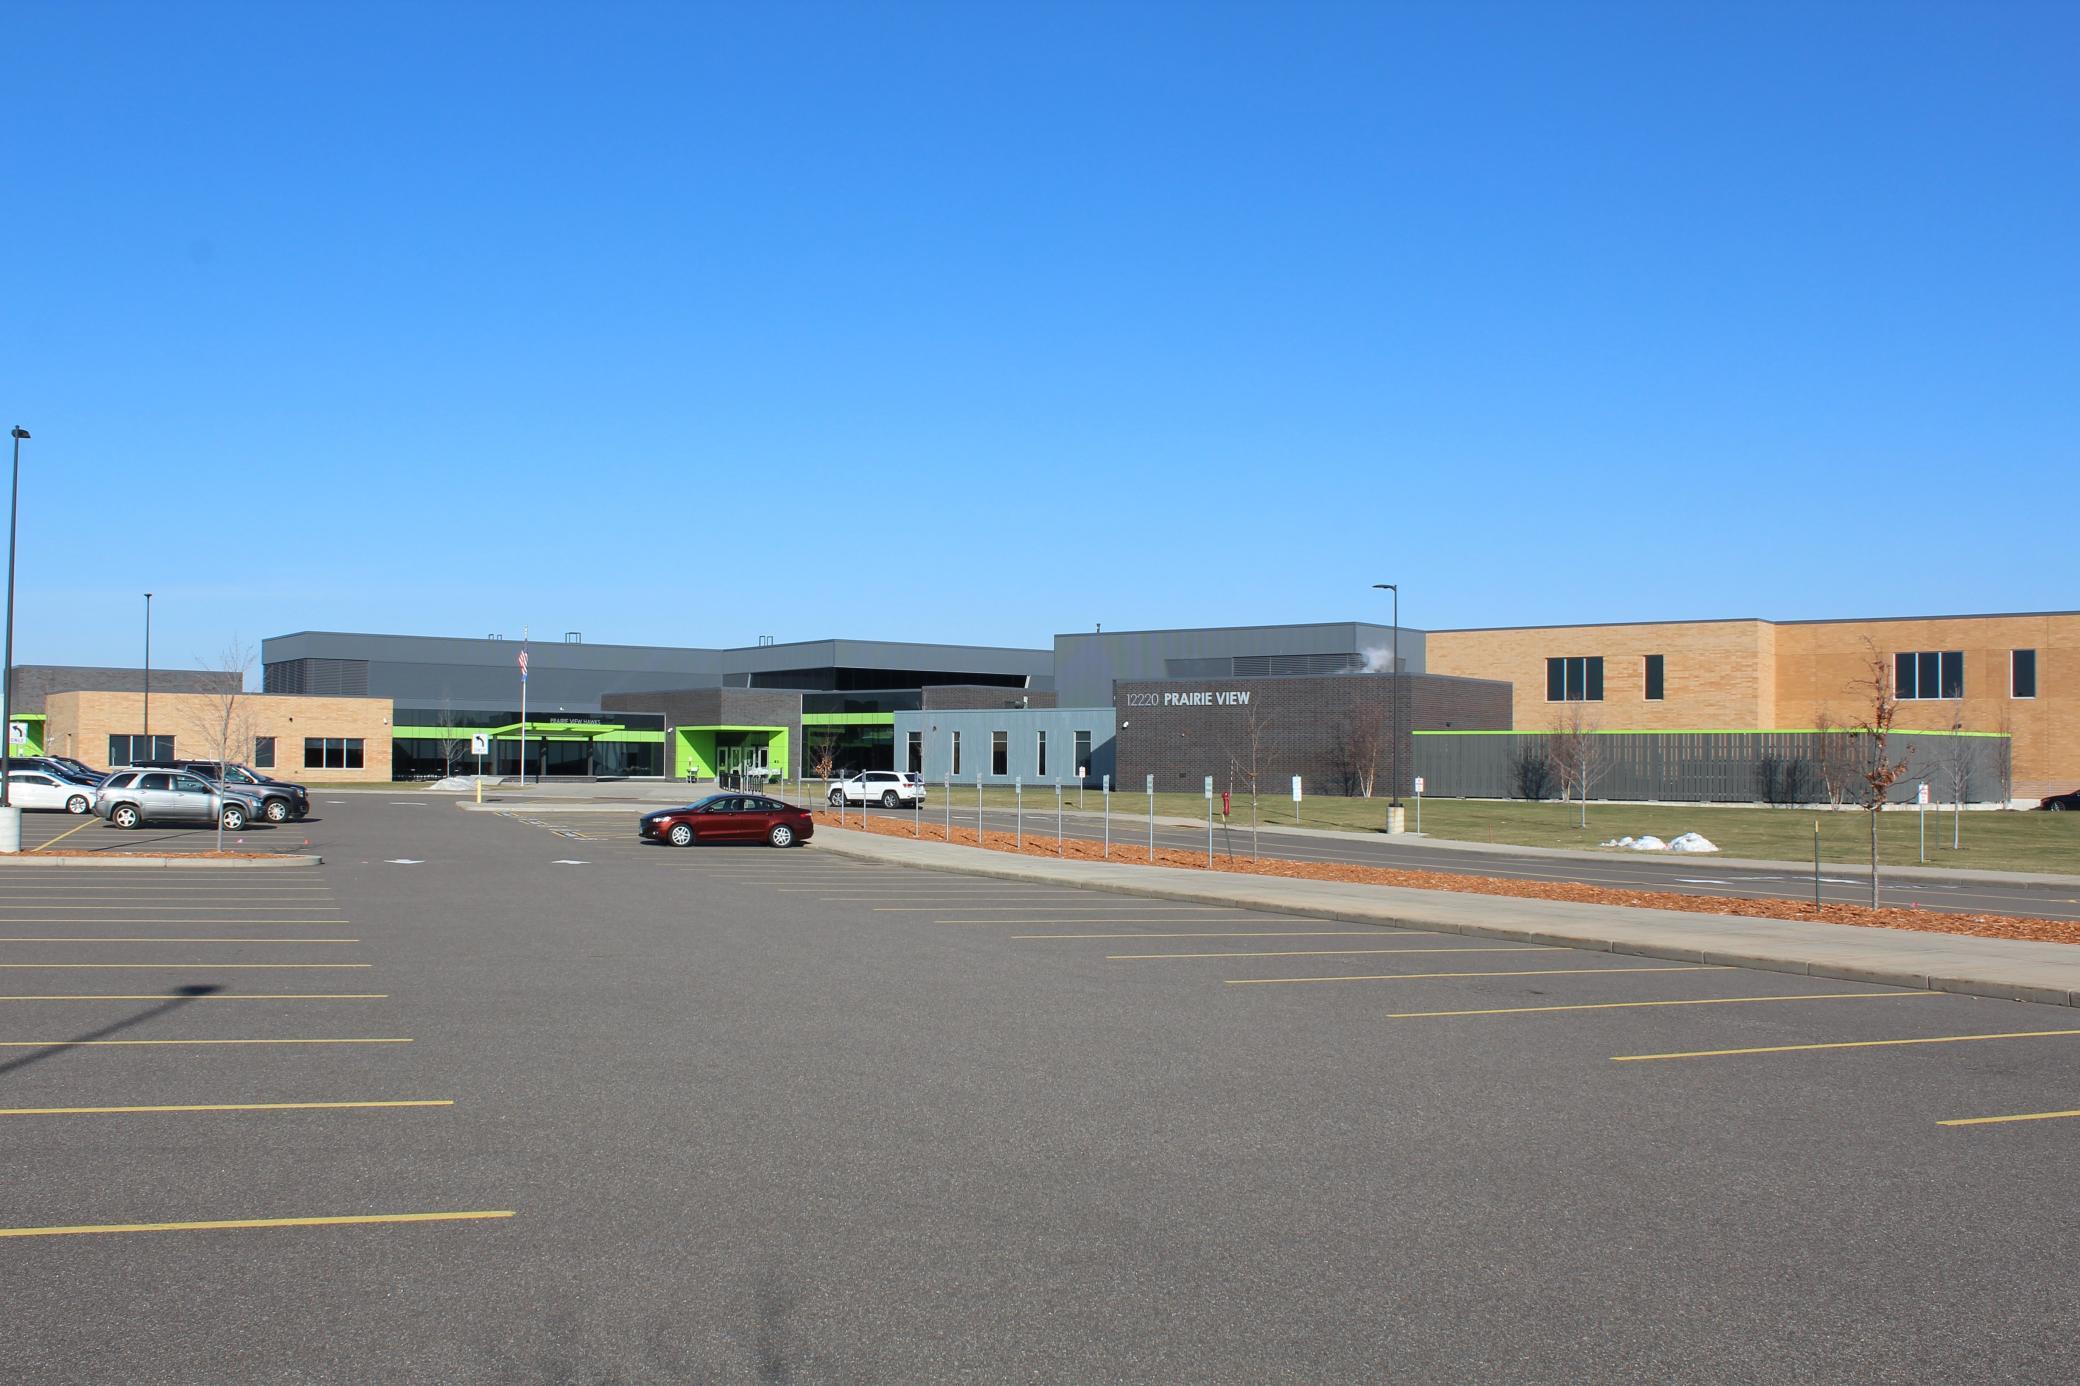 Prairie View Elementary, establish in 2017, provides a state-of-the-art learning facility is adjacent to the Prairie Pointe community. Not to mention brand new middle school onsite that opened for the 2022-2023 school year.